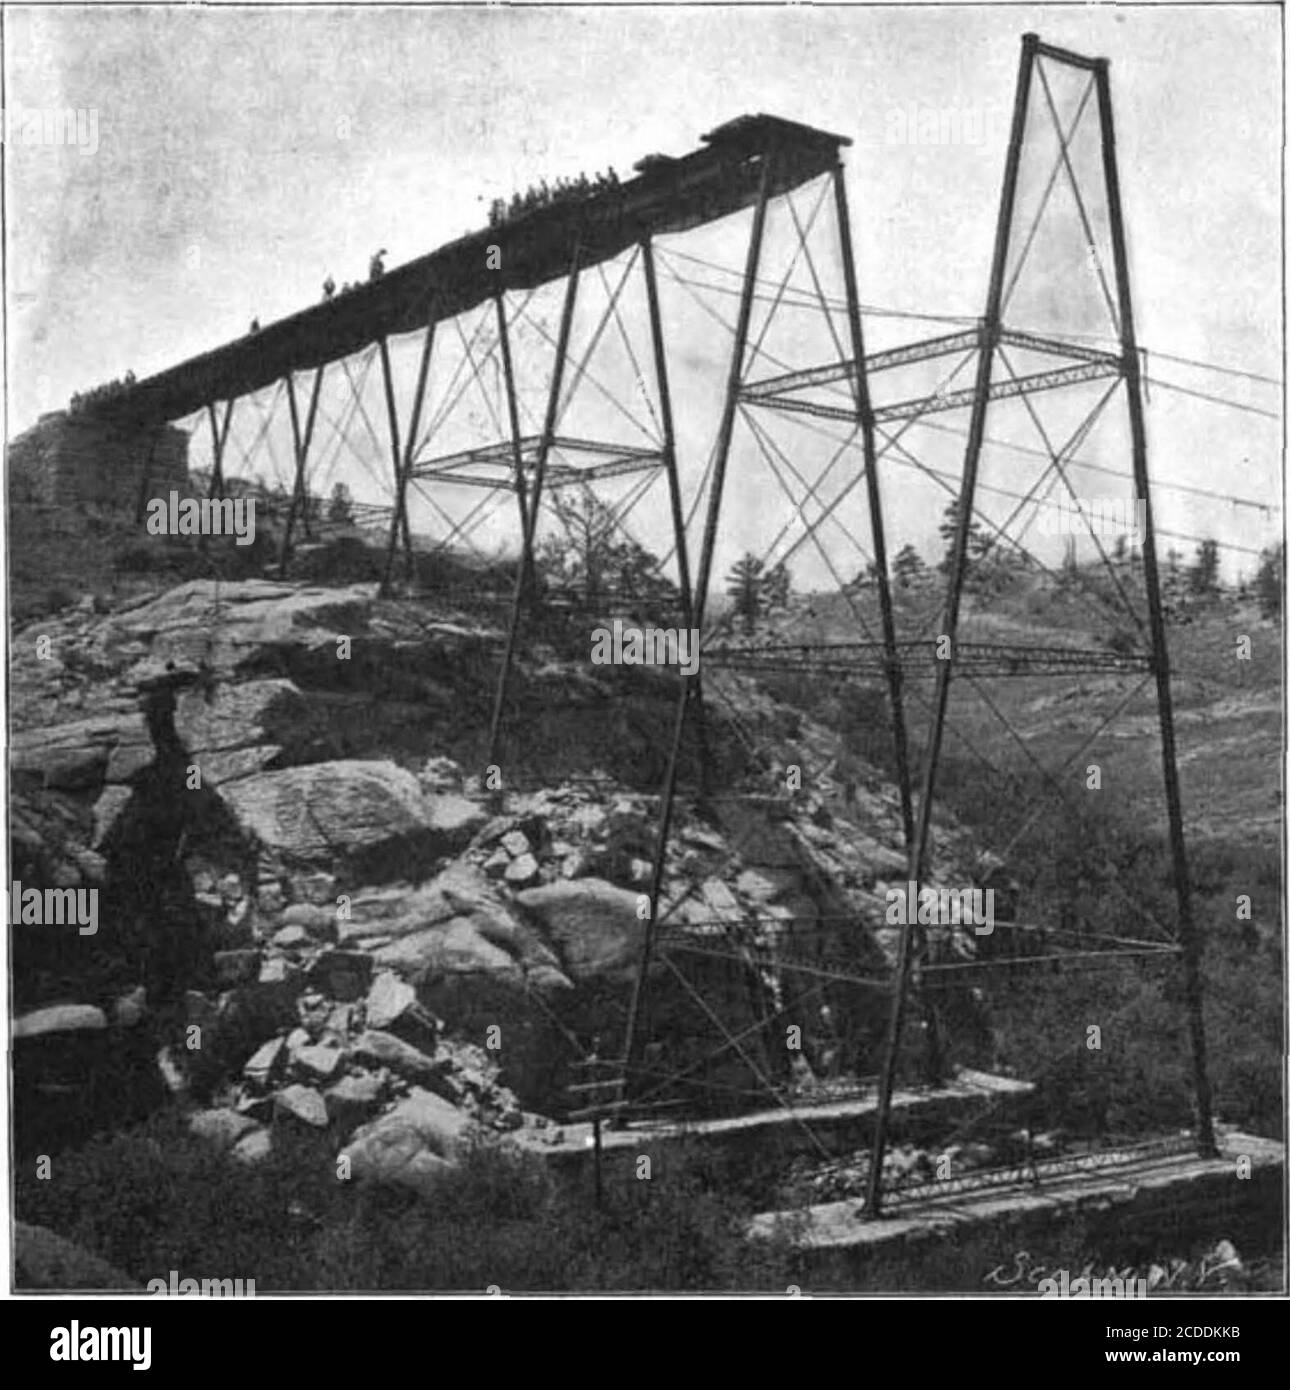 . Scientific American Volume 86 Number 14 (April 1902) . our illustrations in process of removal. A point ofinterest to those who have traveled over the UnionPacific line is that the new line will carry passengersacross the summit, at a considerable distance fromthe great pyramid of cut stone, costing $80,000, whichwas erected at the old summit to the memory of OakesAmes and his brother, through whose labors the UnionPacific Road was completed in a remarkably shorttime. The next cutoff, from Howell to Huttons, results ina saving of 3.11 miles of distance, with only a singleone-degree curve in Stock Photo